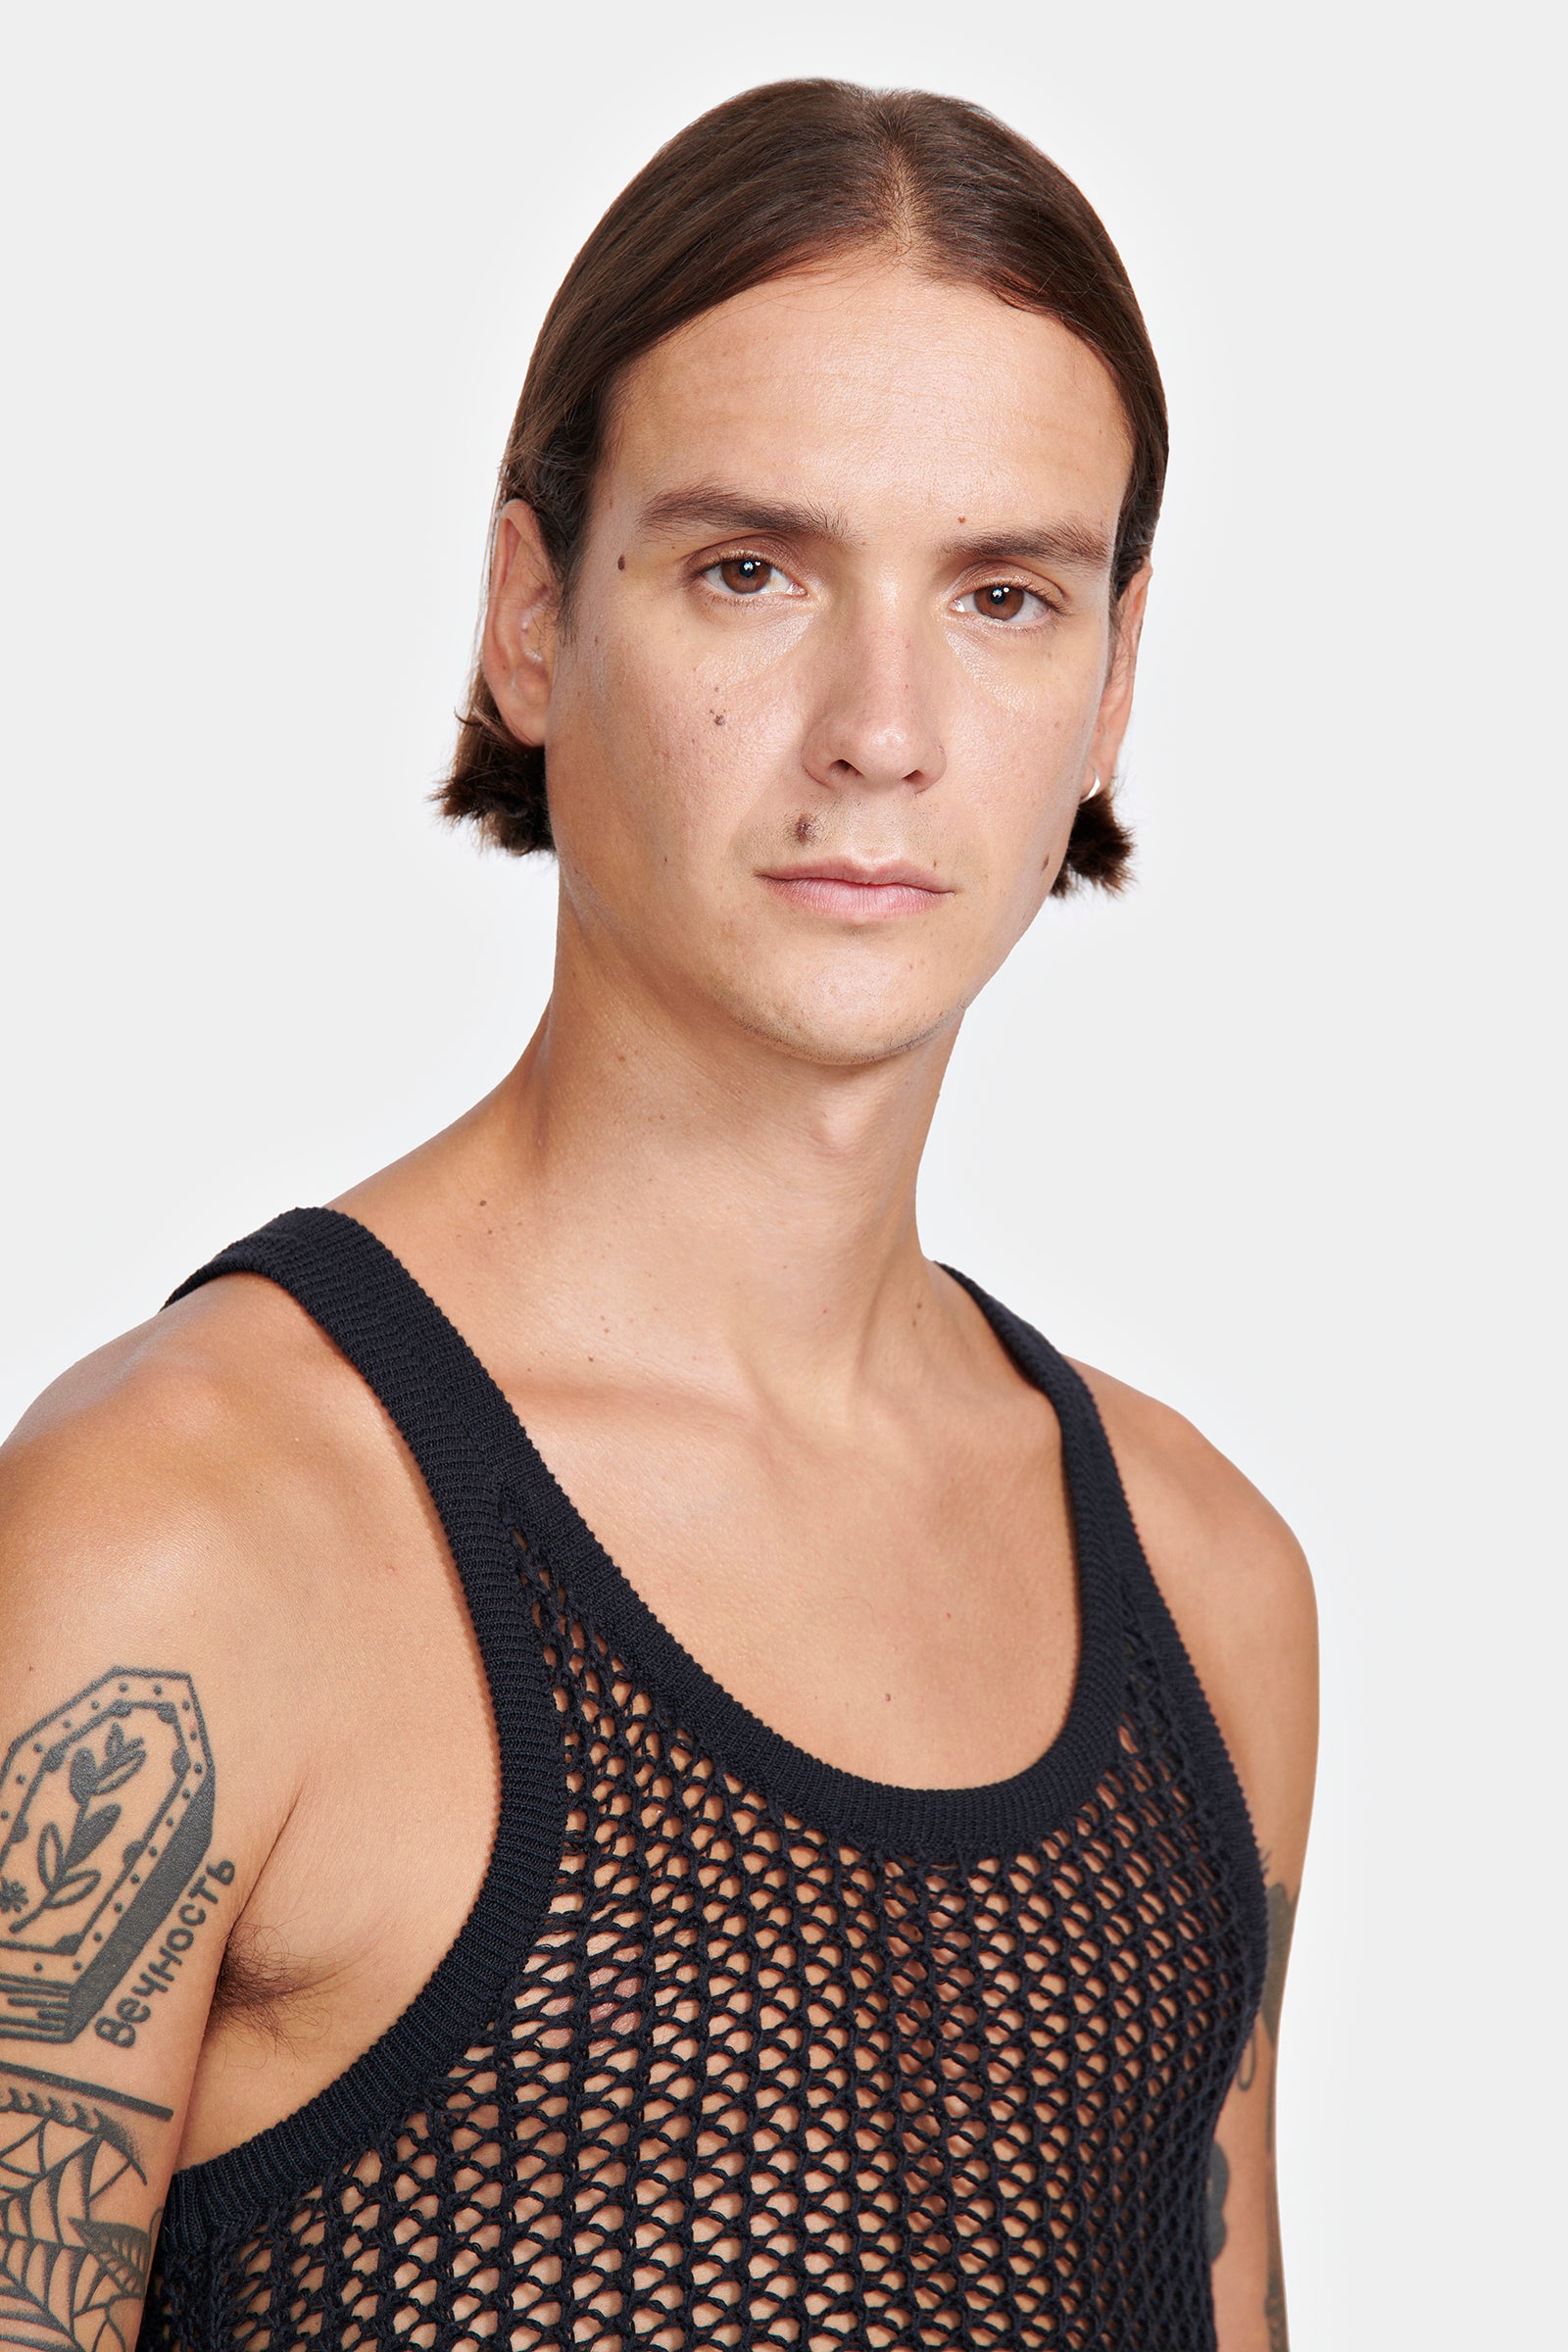 NET STITCH KNITTED TANK TOP